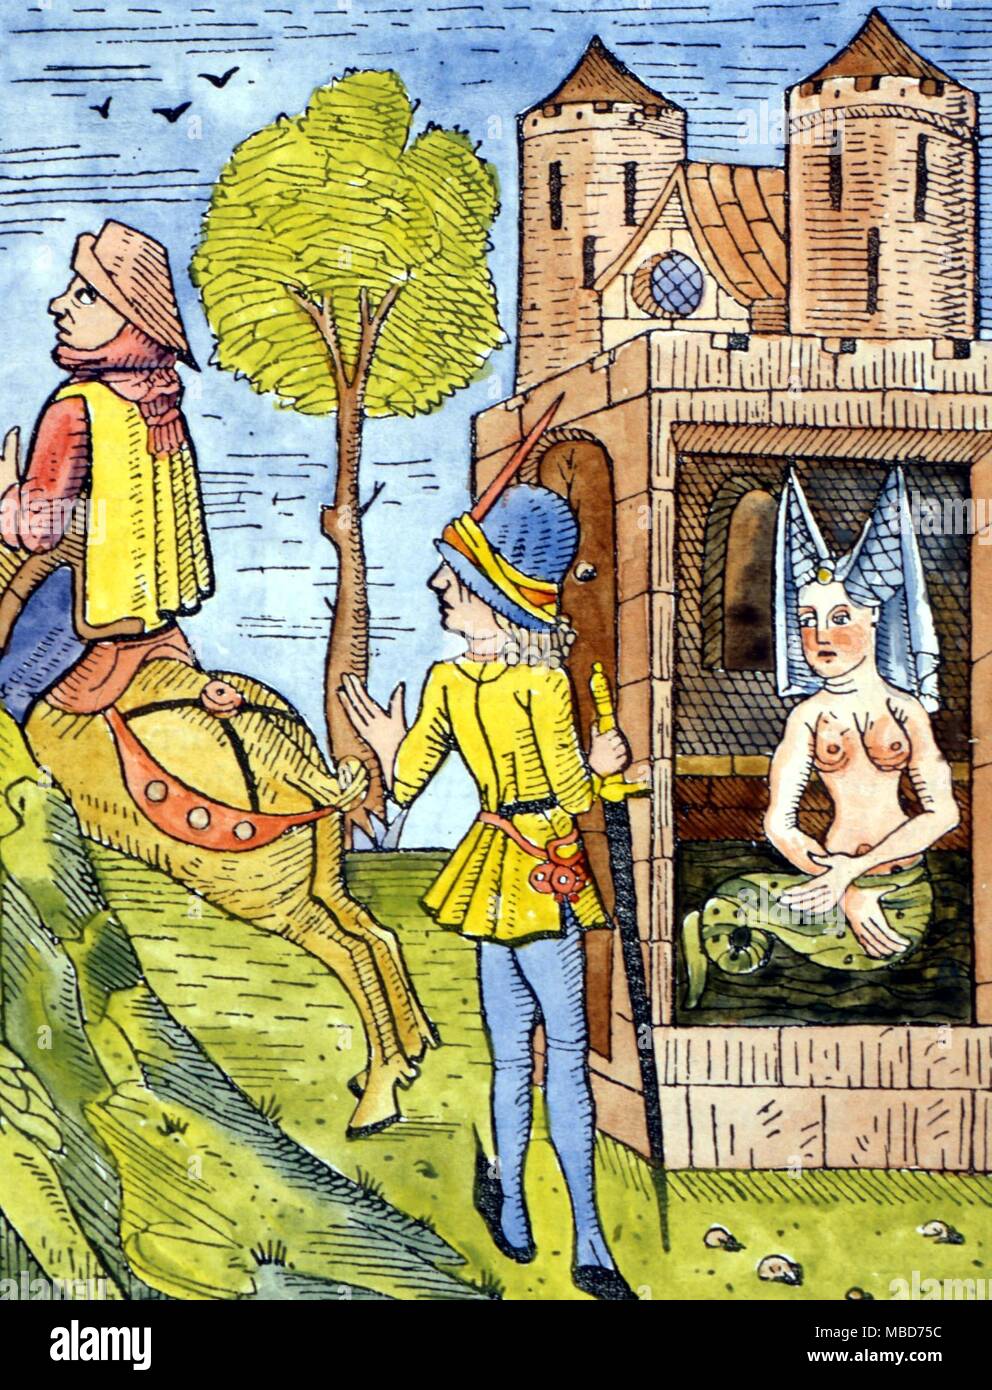 Fairies - Fairy-wife - Mediaeval woodcut illustration to the Fairy-wife legend of Melisande. Her husband, forwarned by a neighbour (riding away) spied upon his fairy-wife on a day she had formerly forbidden him to see her. She is serpent-tailed. Early 16th century. Stock Photo